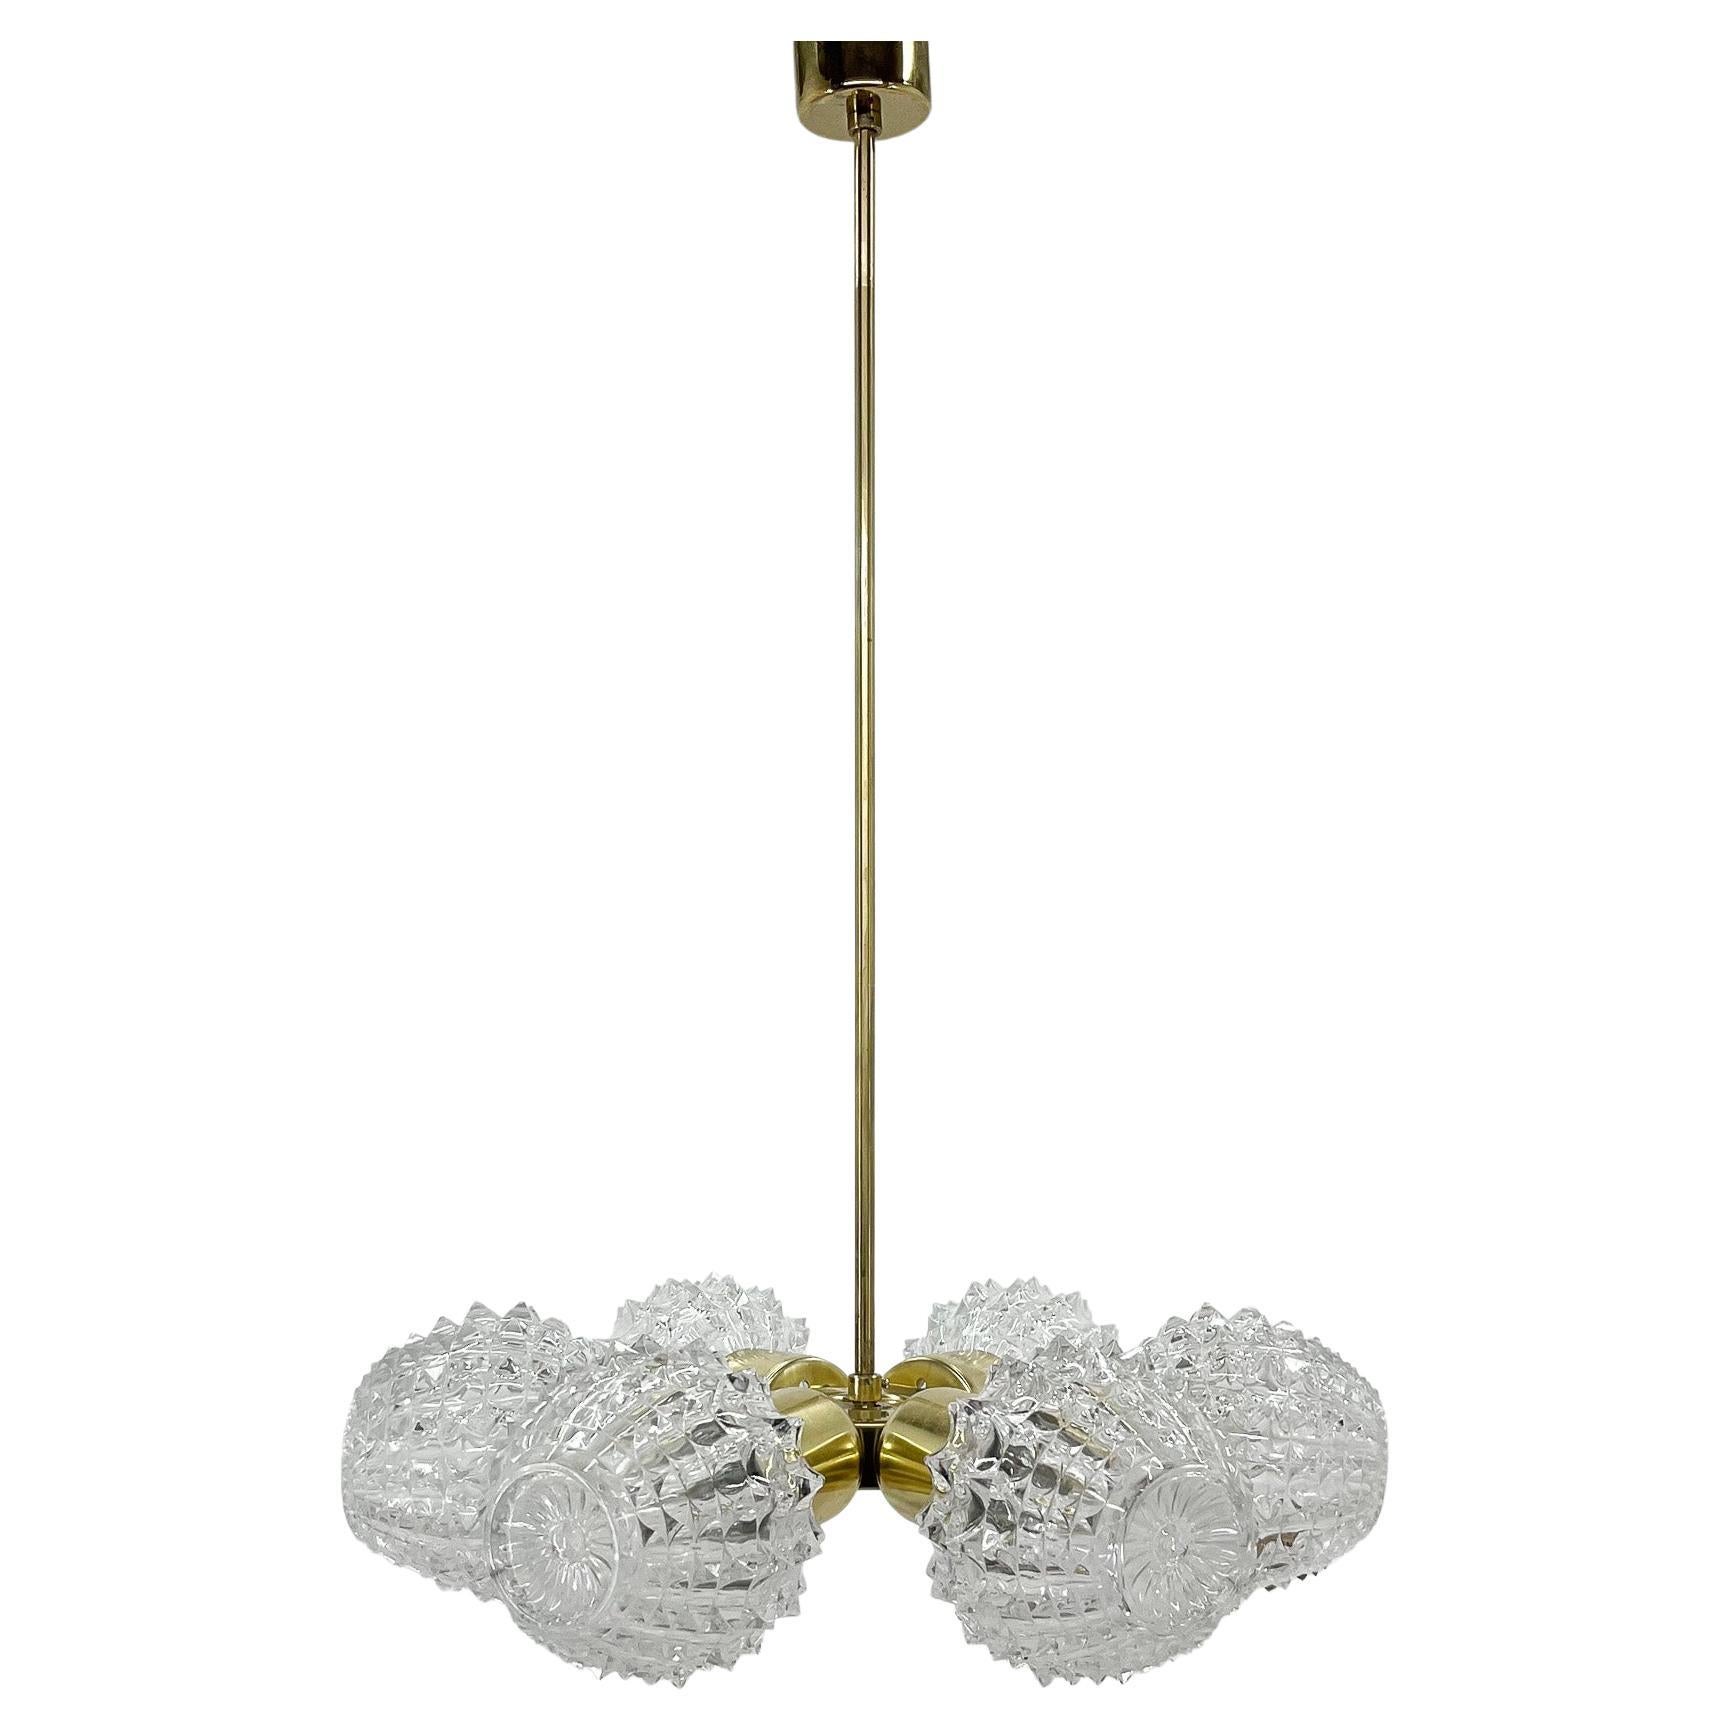 1960s Brass & Glass Chandelier by Kamenicky Senov, 2 Pieces Available For Sale